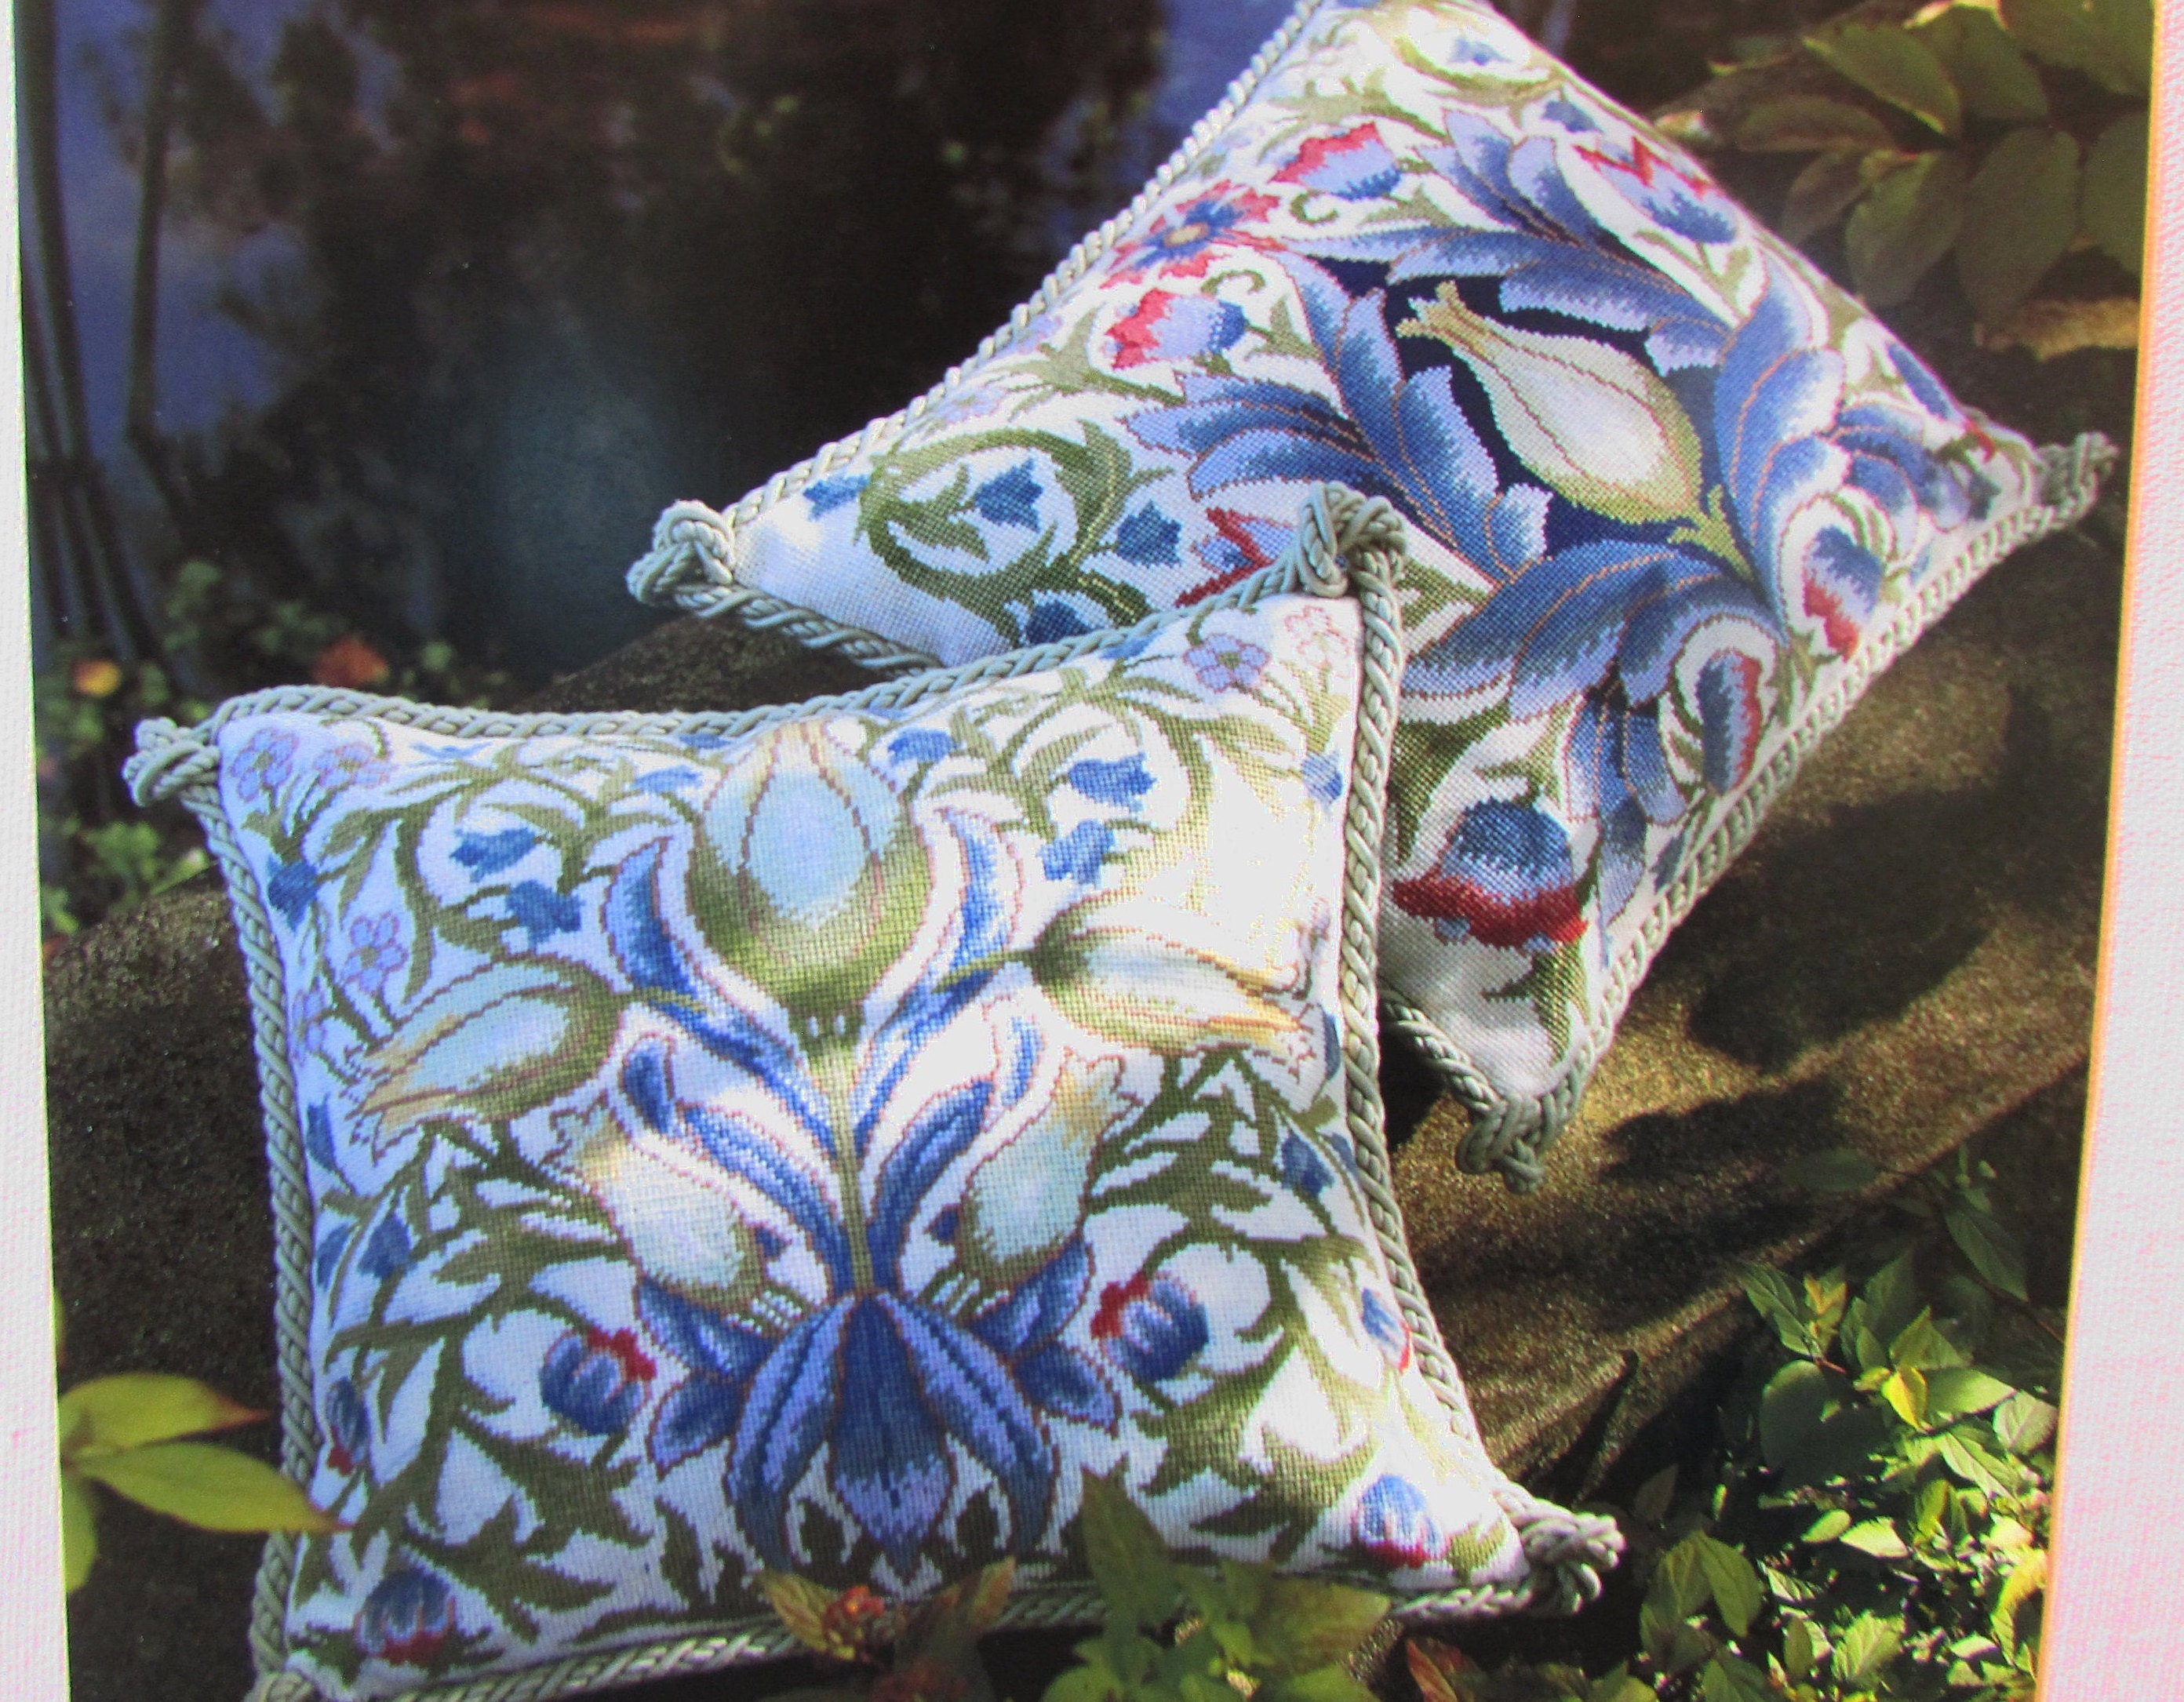 Tulip Grid Pillow / Tray Needlepoint Canvas - Blue